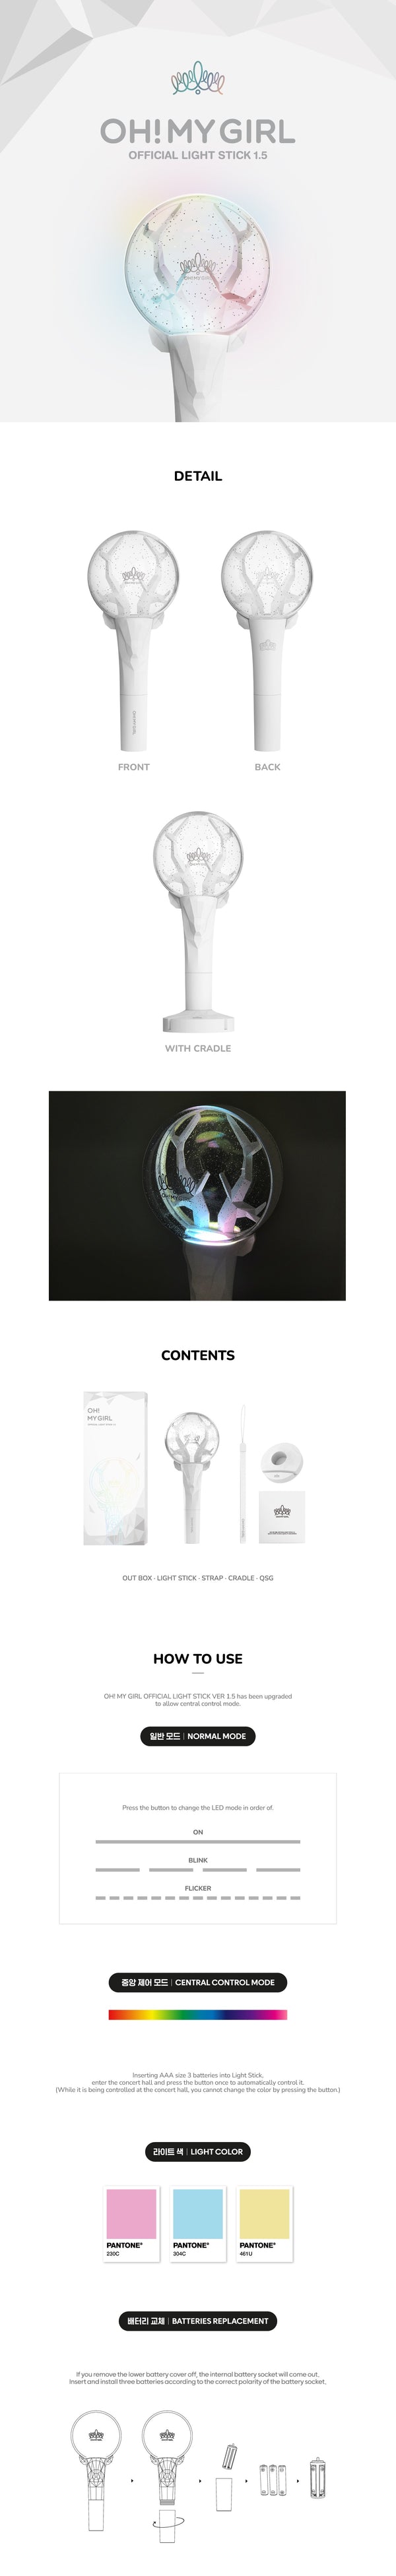 [PREORDER] OH MY GIRL - OFFICIAL LIGHT STICK VER 1.5